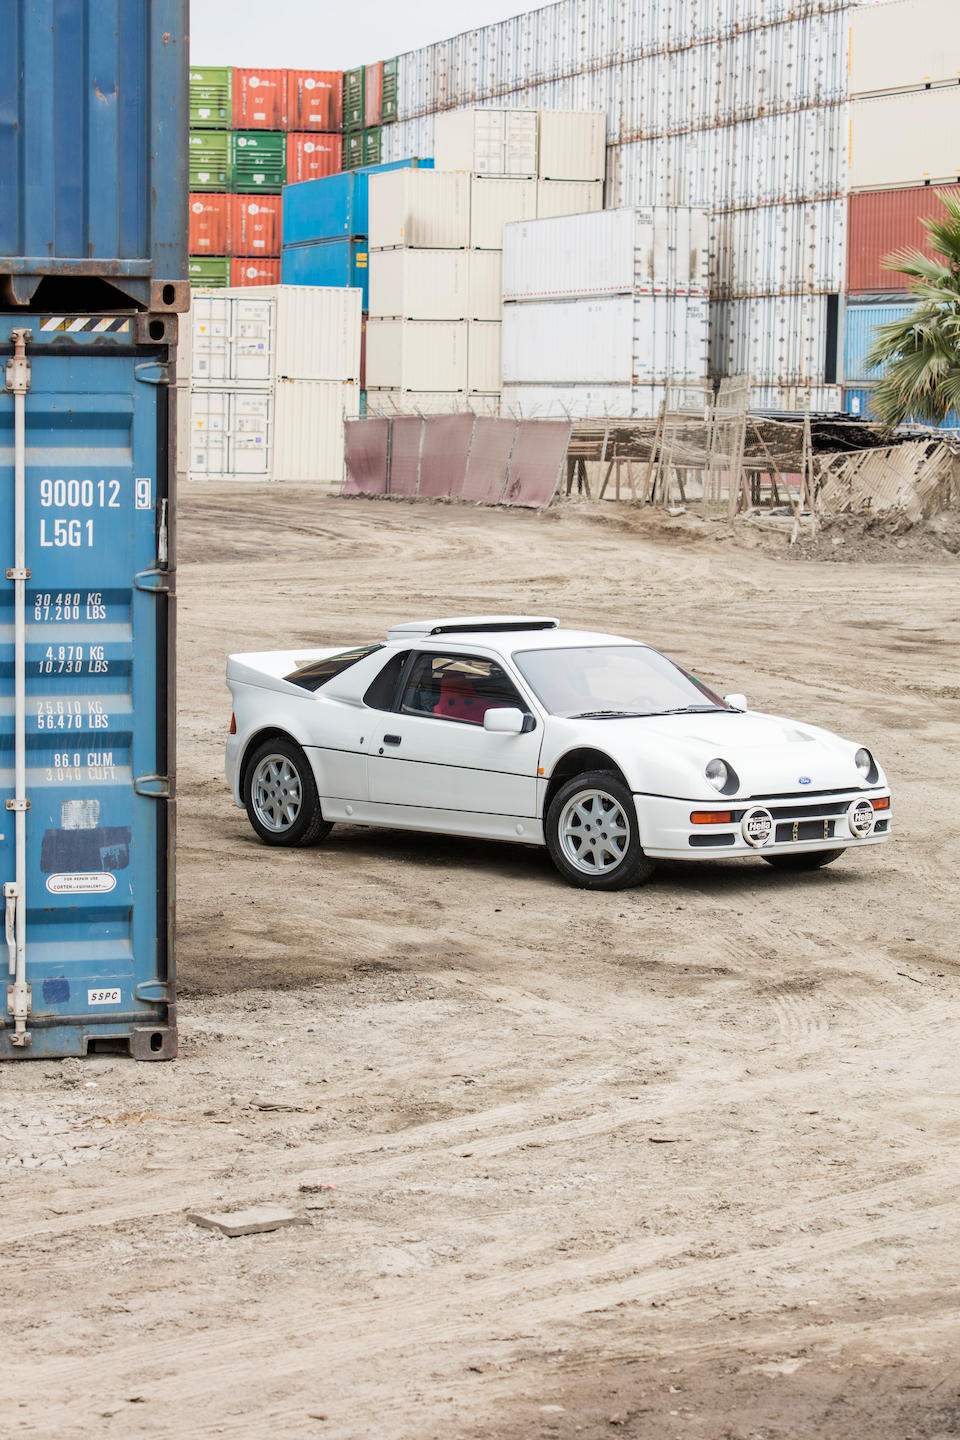 <b>1986 Ford RS 200</b><br />Chassis no. SFACXXBJ2CGL00133<br />